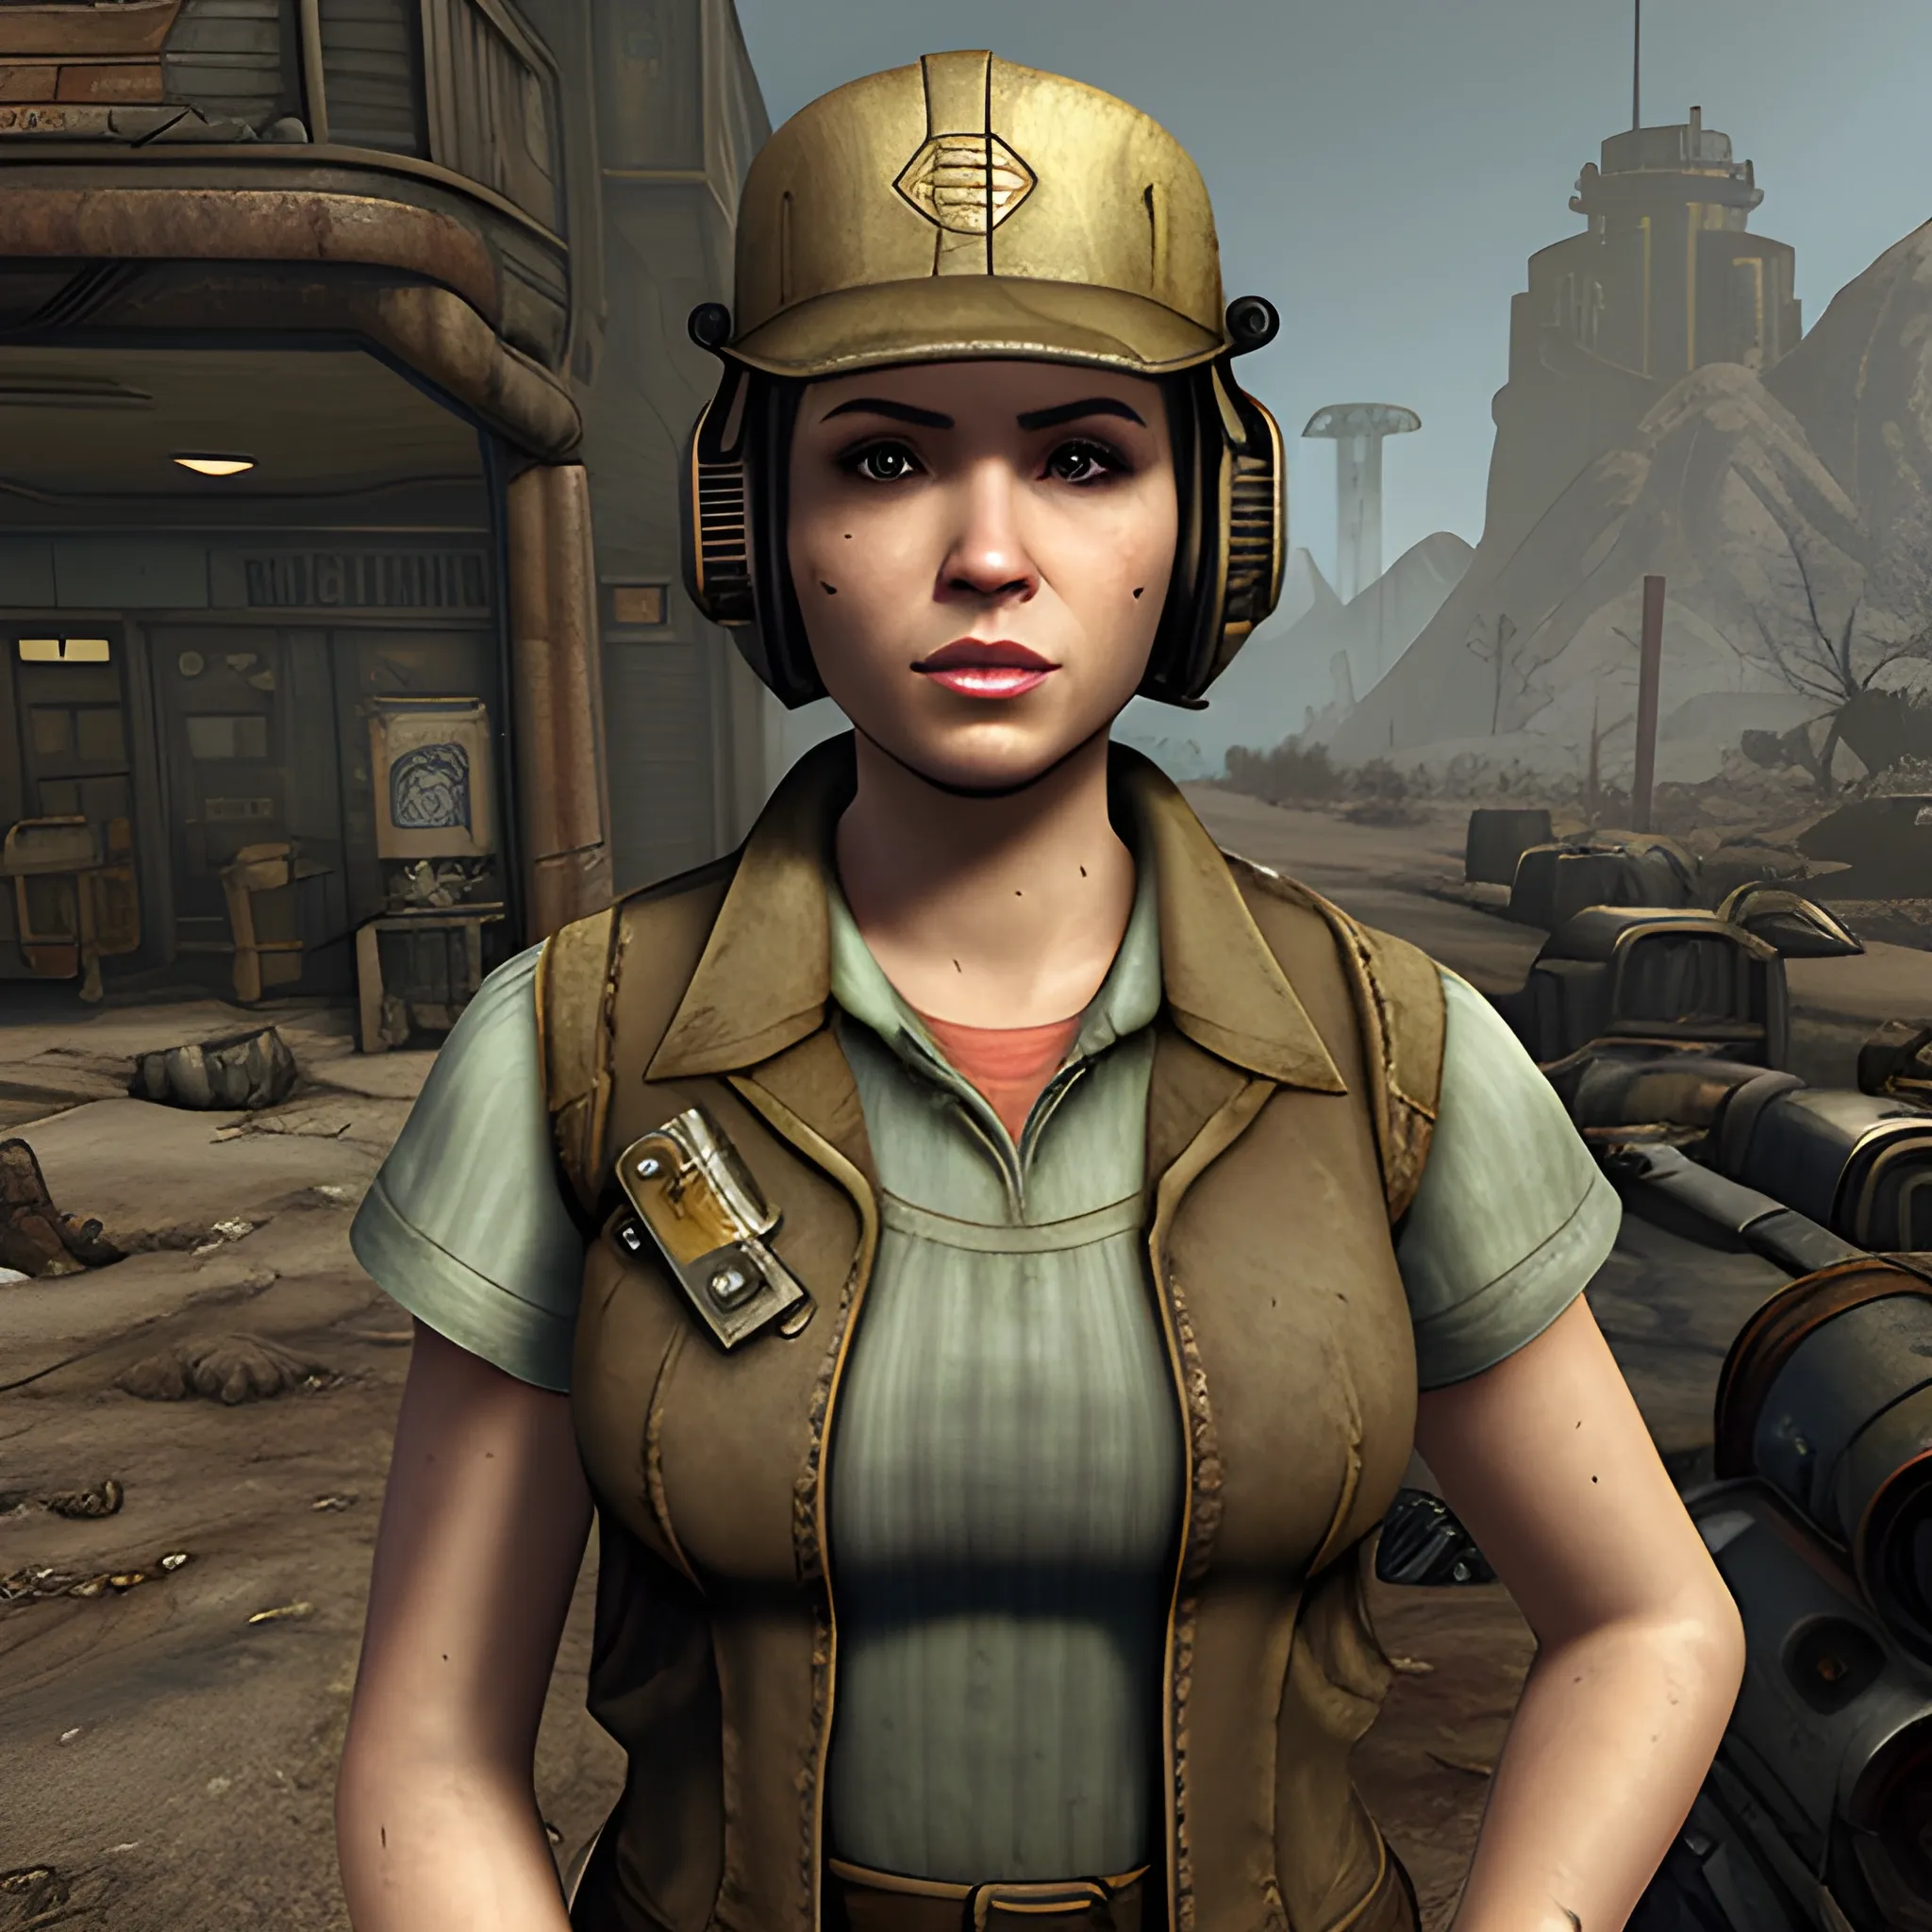 In the style of Fallout New Vegas, masterpiece, Kaylee from Firefly as a Brotherhood of Steel Scribe with a dirty face and tilted cap, vest full of tools and notebooks